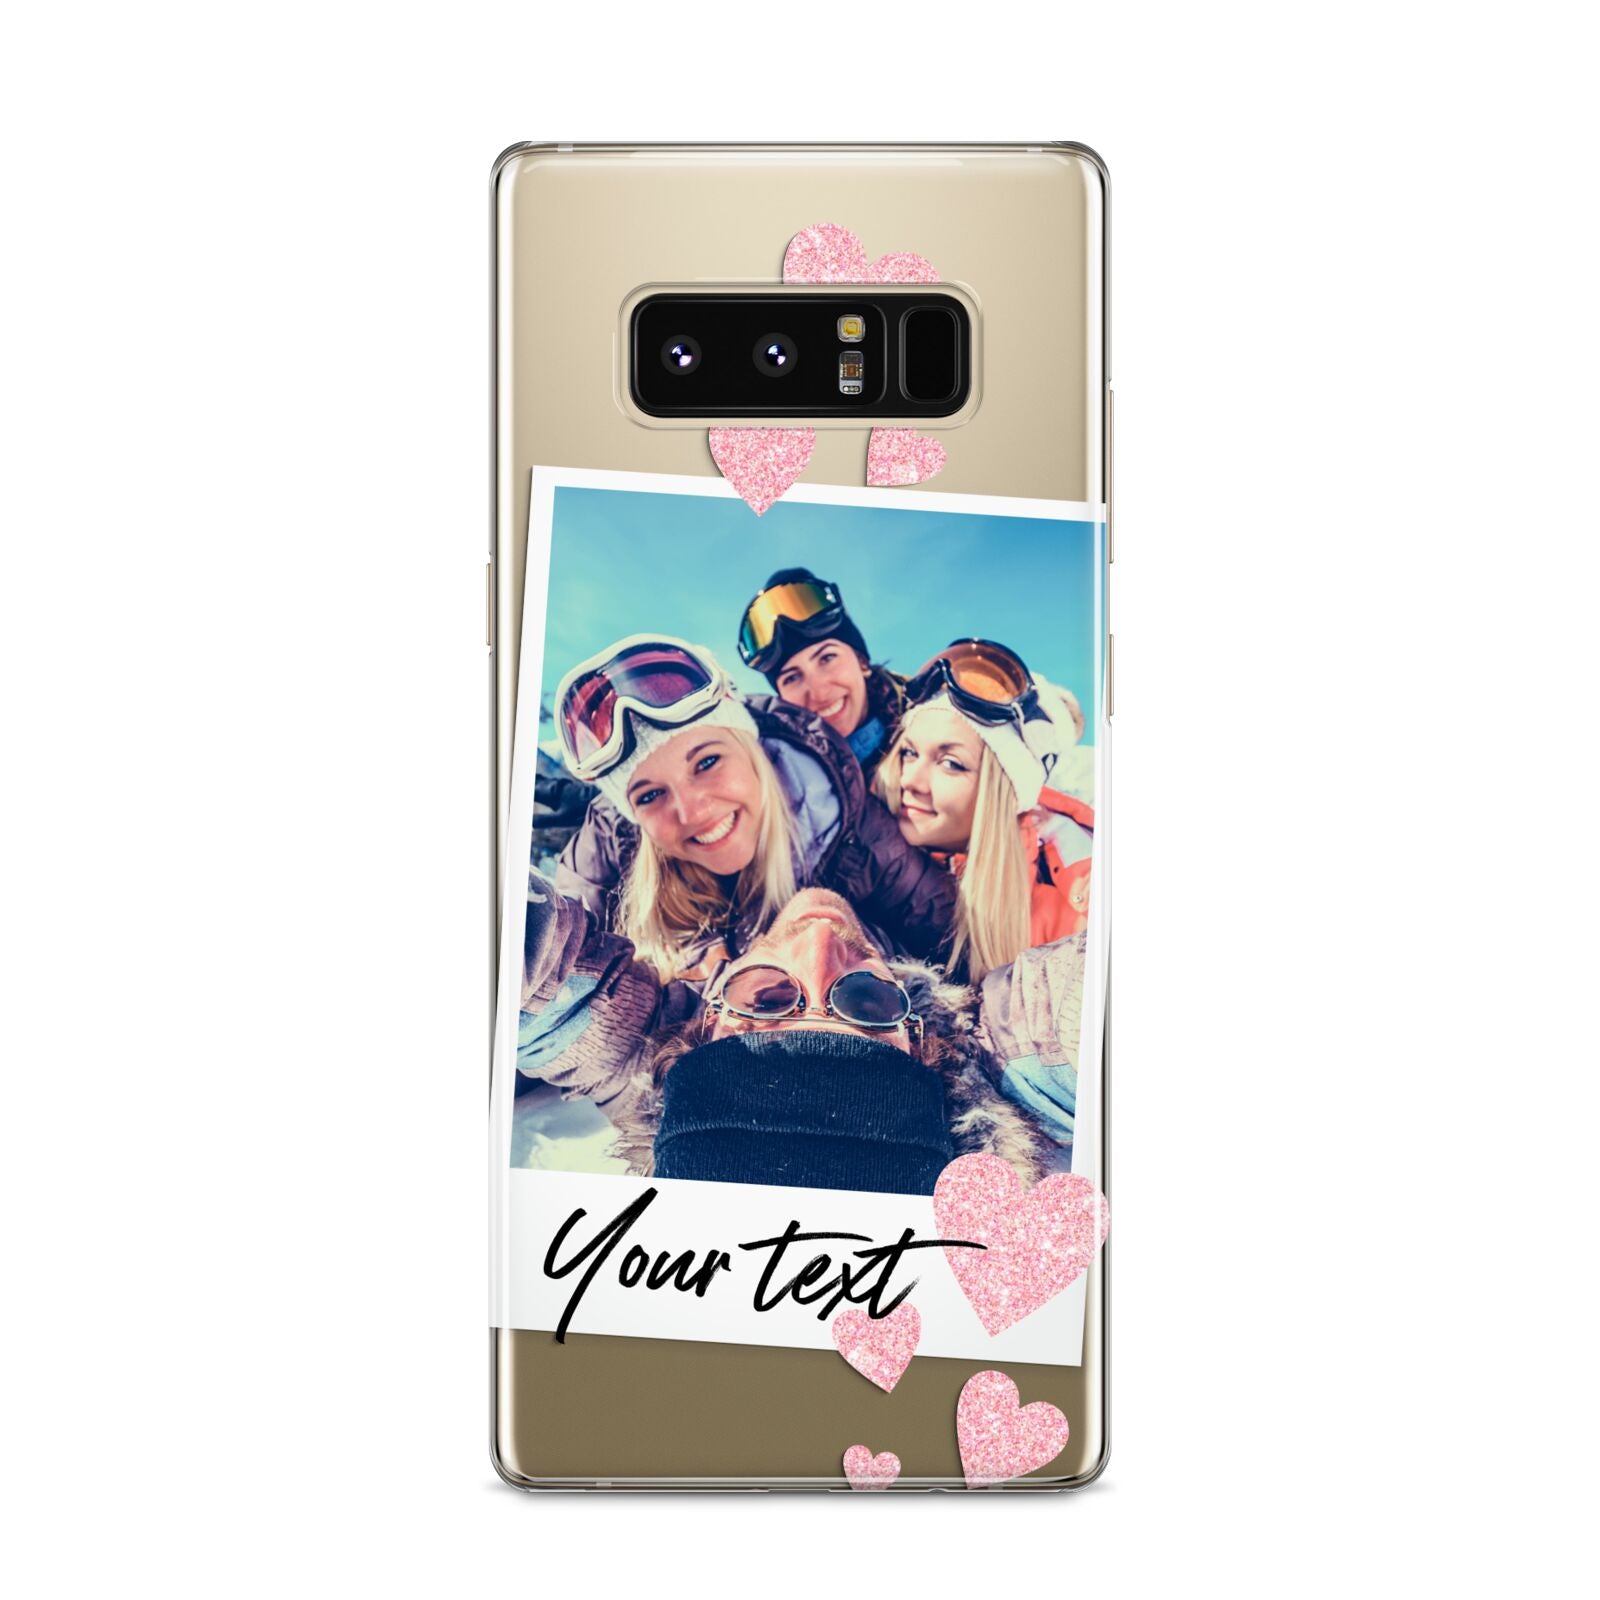 Photo with Text Samsung Galaxy S8 Case